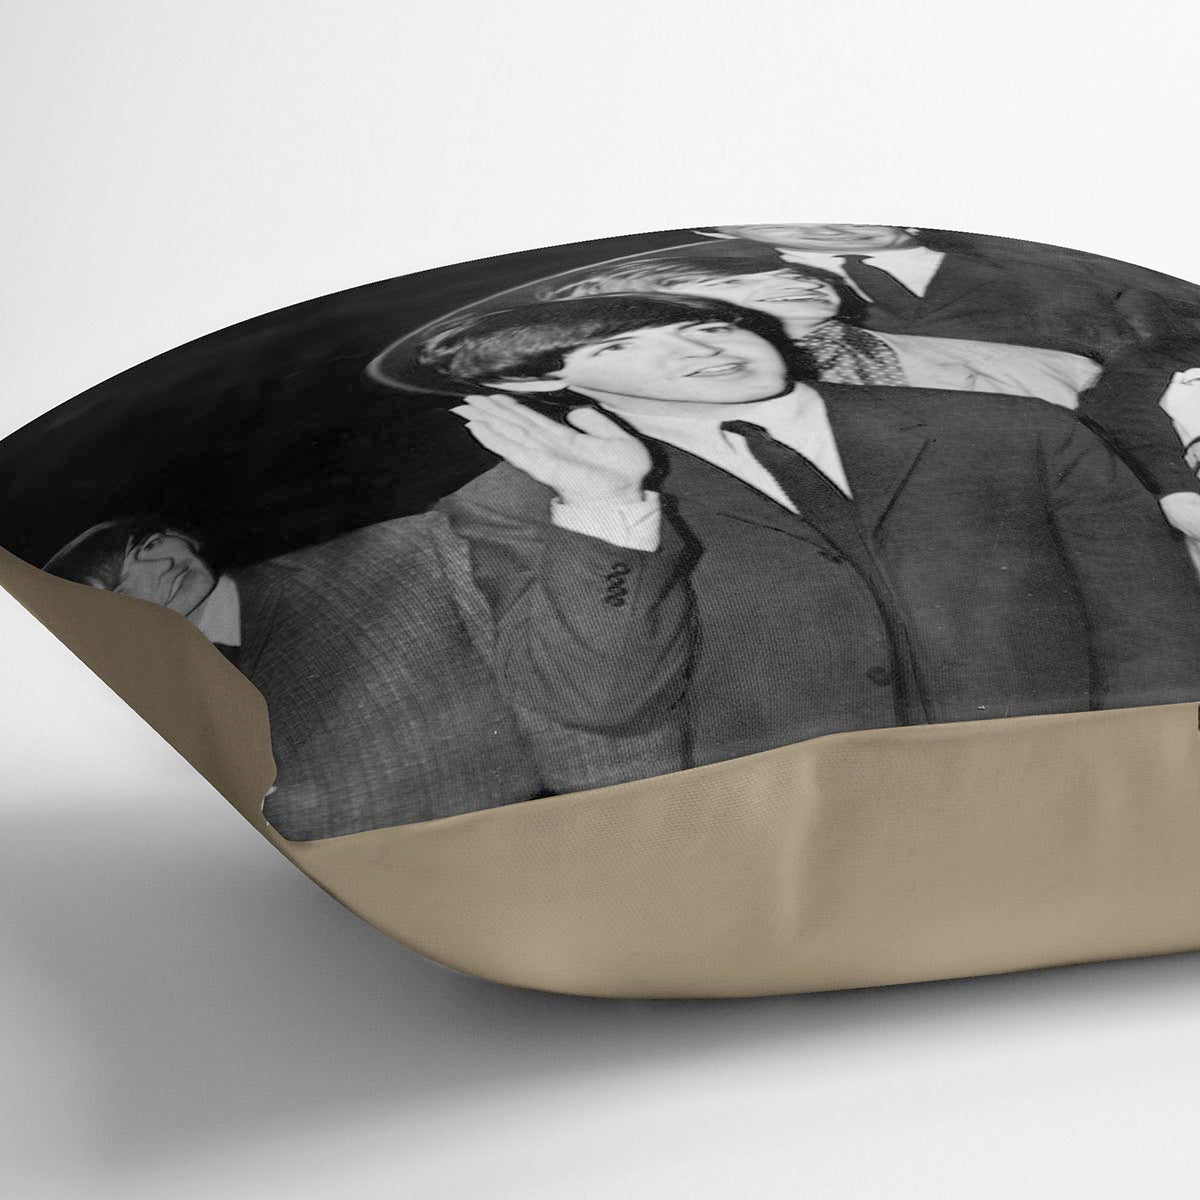 The Beatles with Brian Epstein at London Airport Cushion